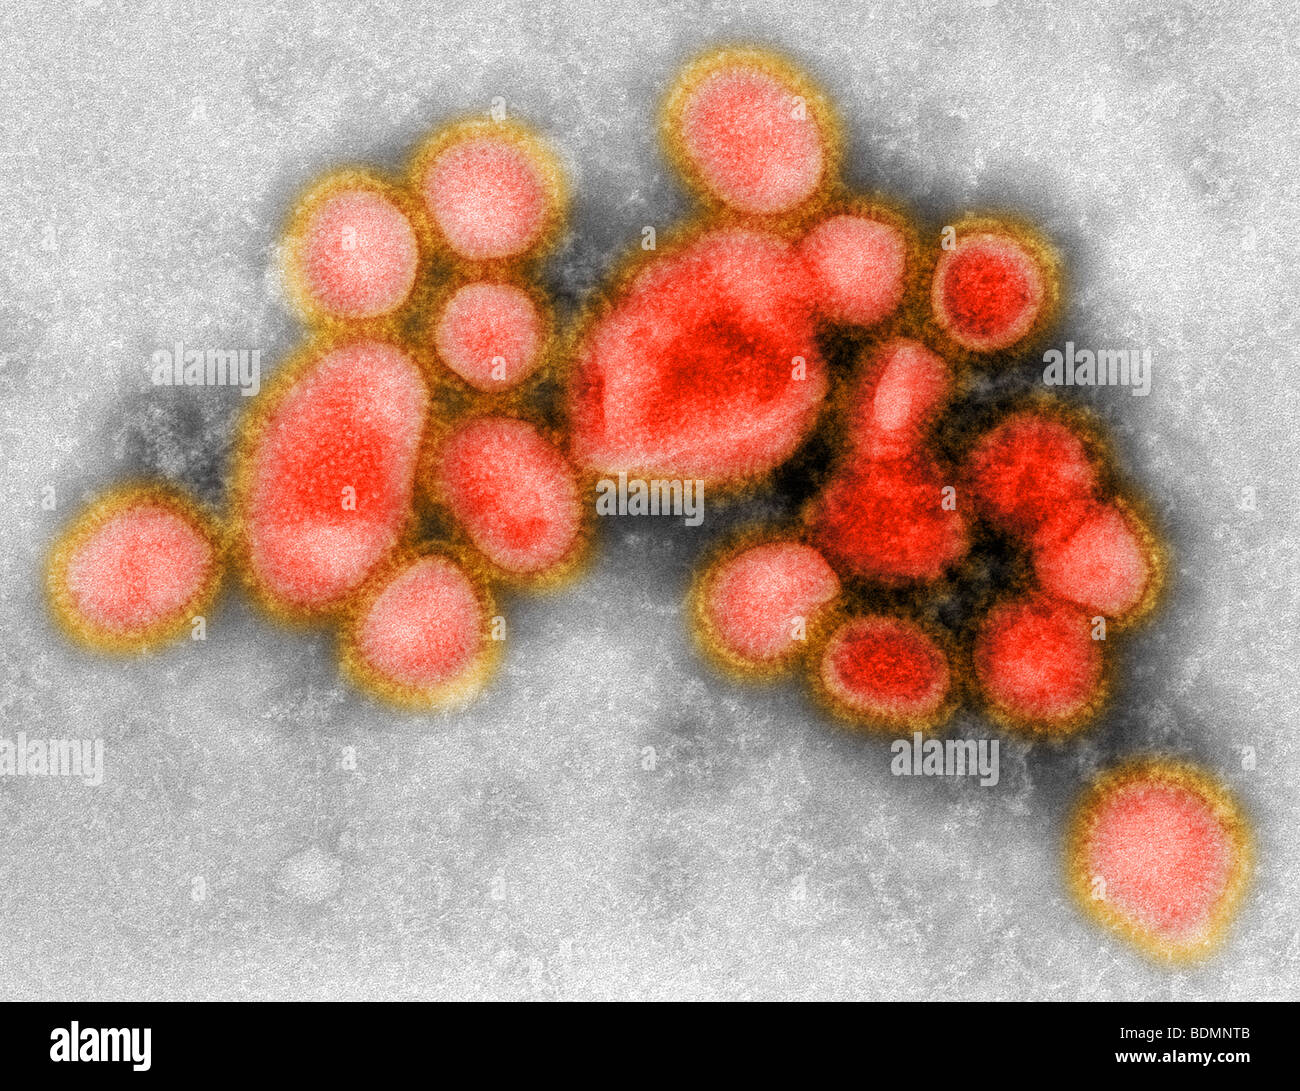 Images of the newly identified H1N1 influenza virus Stock Photo